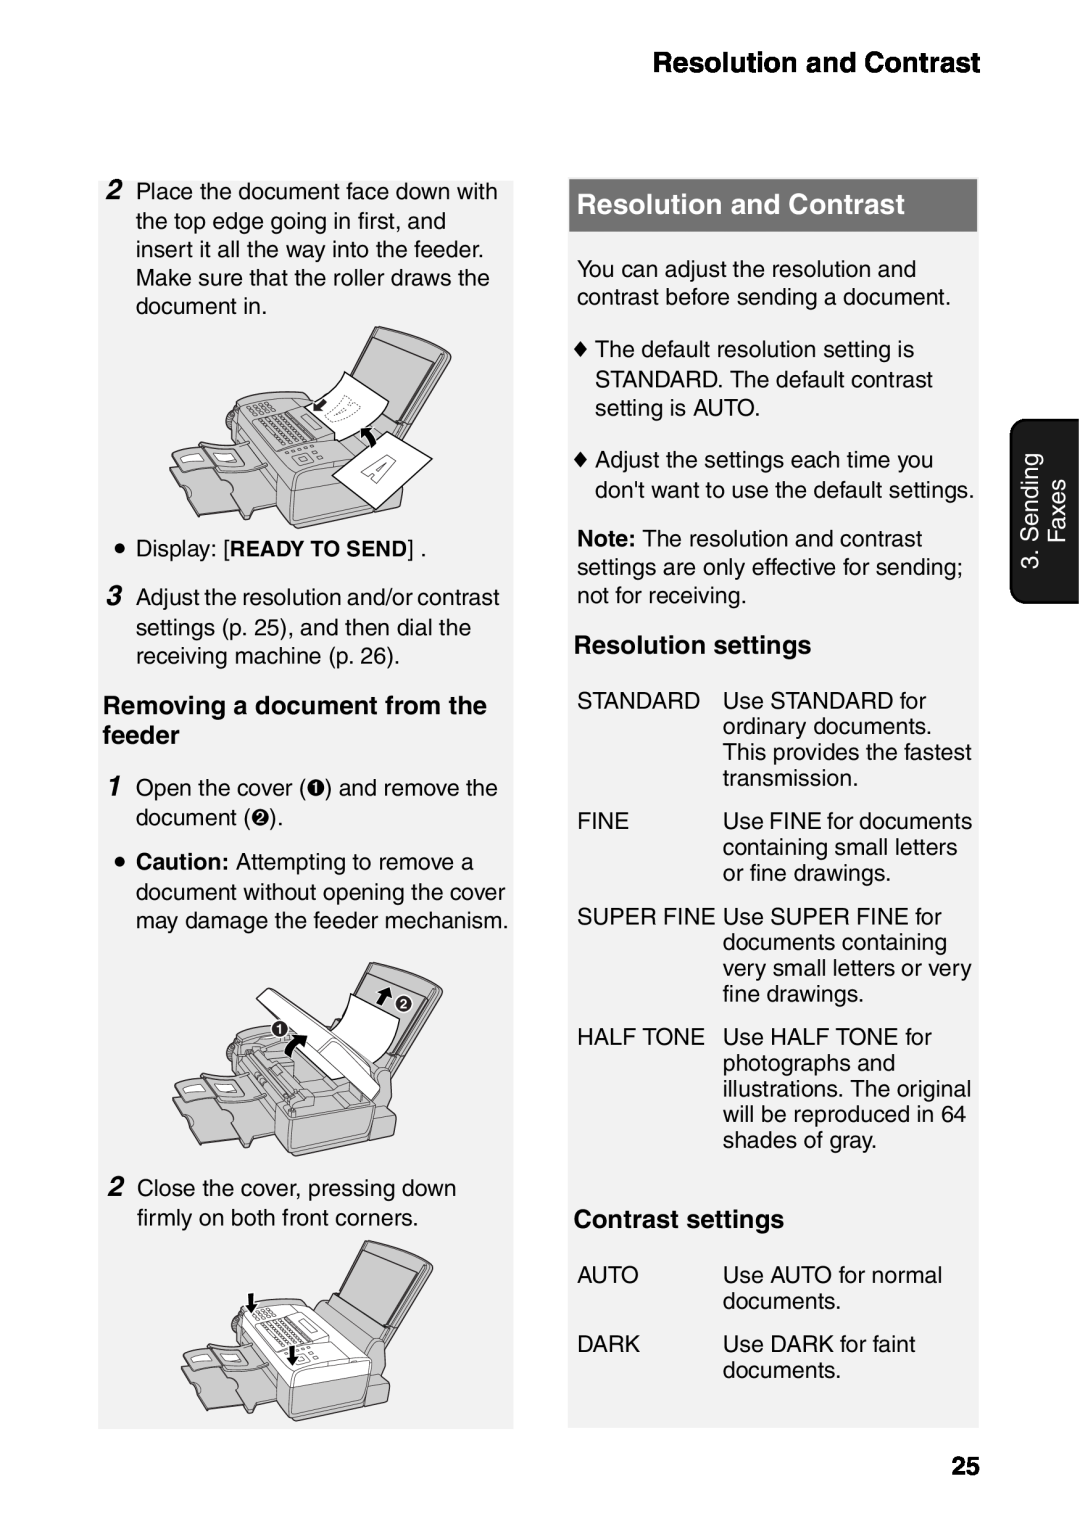 Sharp UX-B800SE operation manual Resolution and Contrast, Faxes 